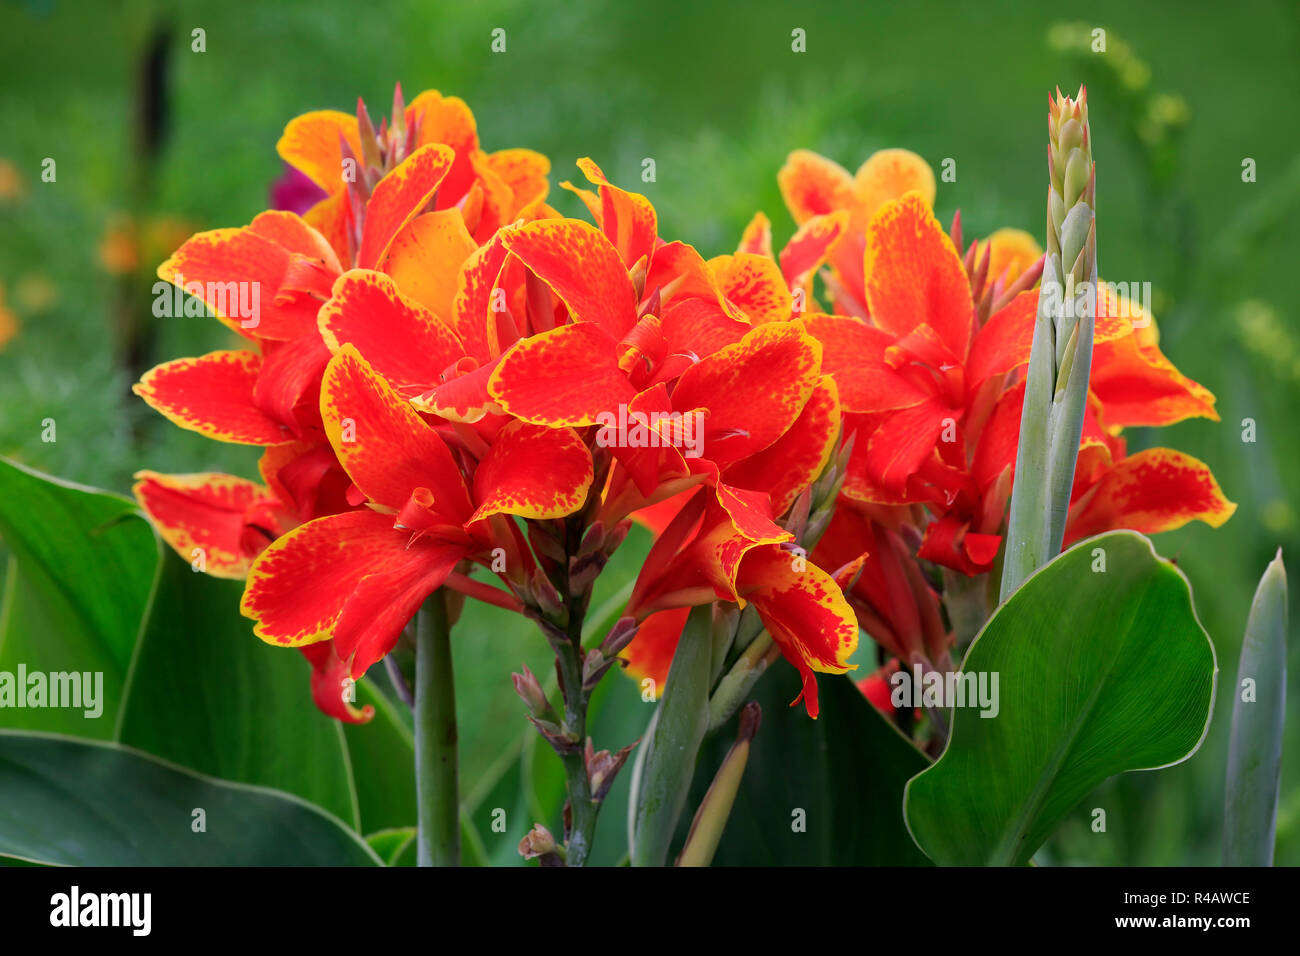 Indian shot, blooming, Germany, Europe, (Canna indica) Stock Photo